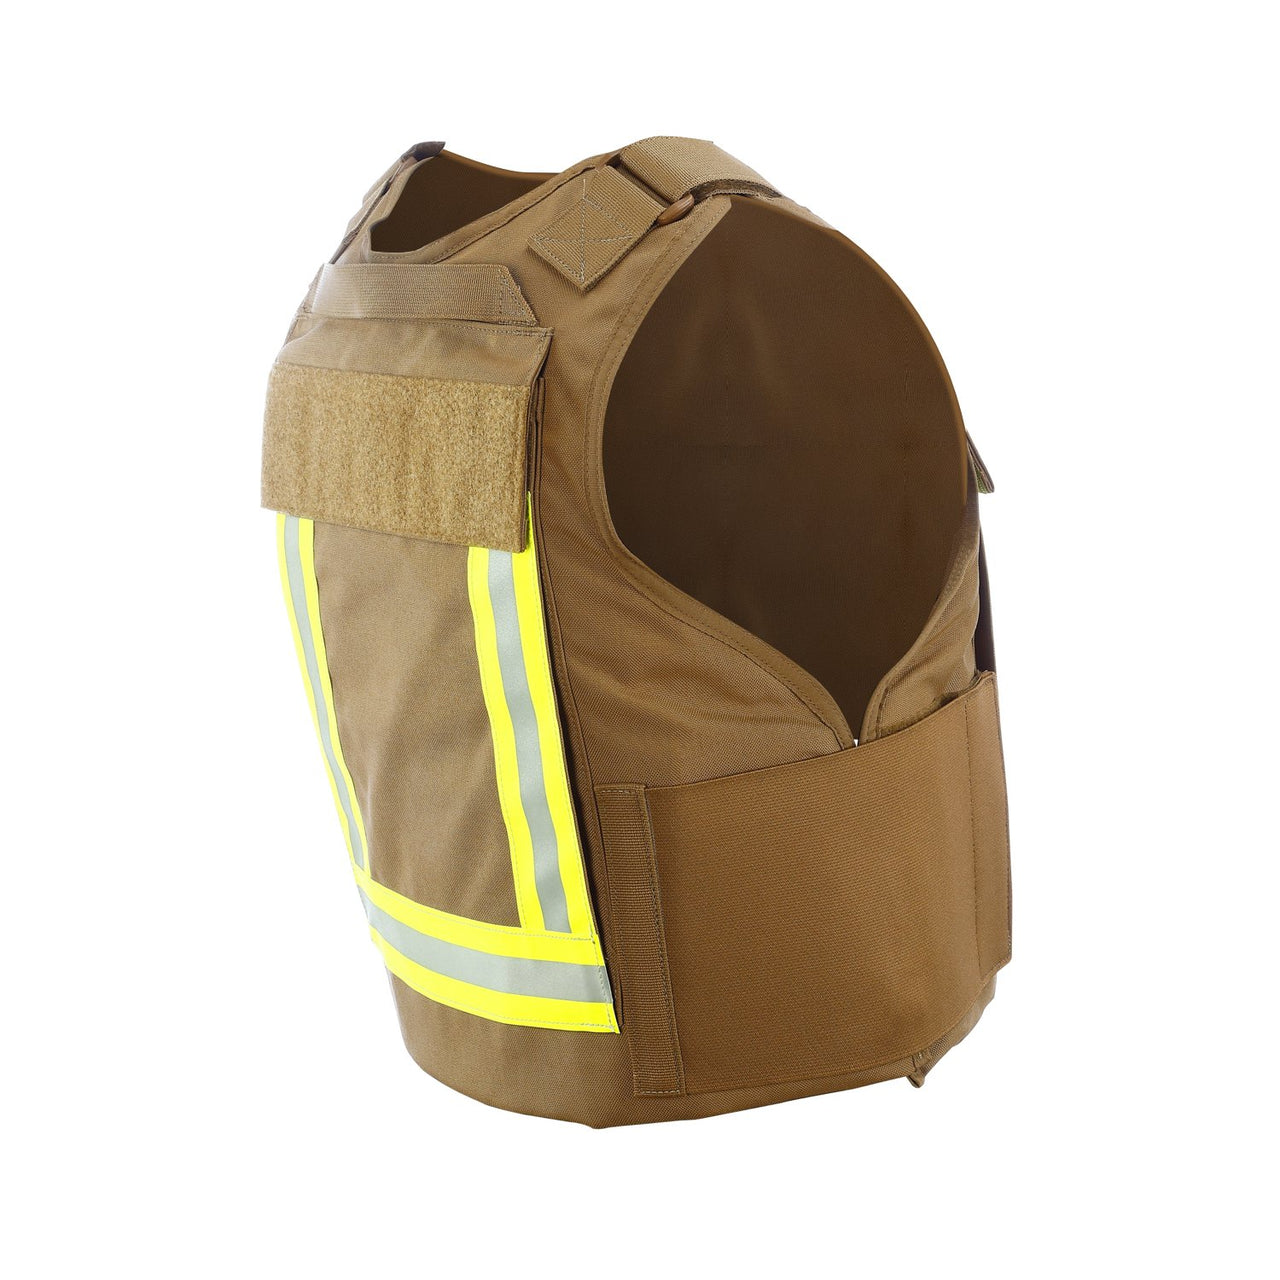 A Body Armor Direct Fireman Tactical Multi-Threat Vest with reflective strips on the back.